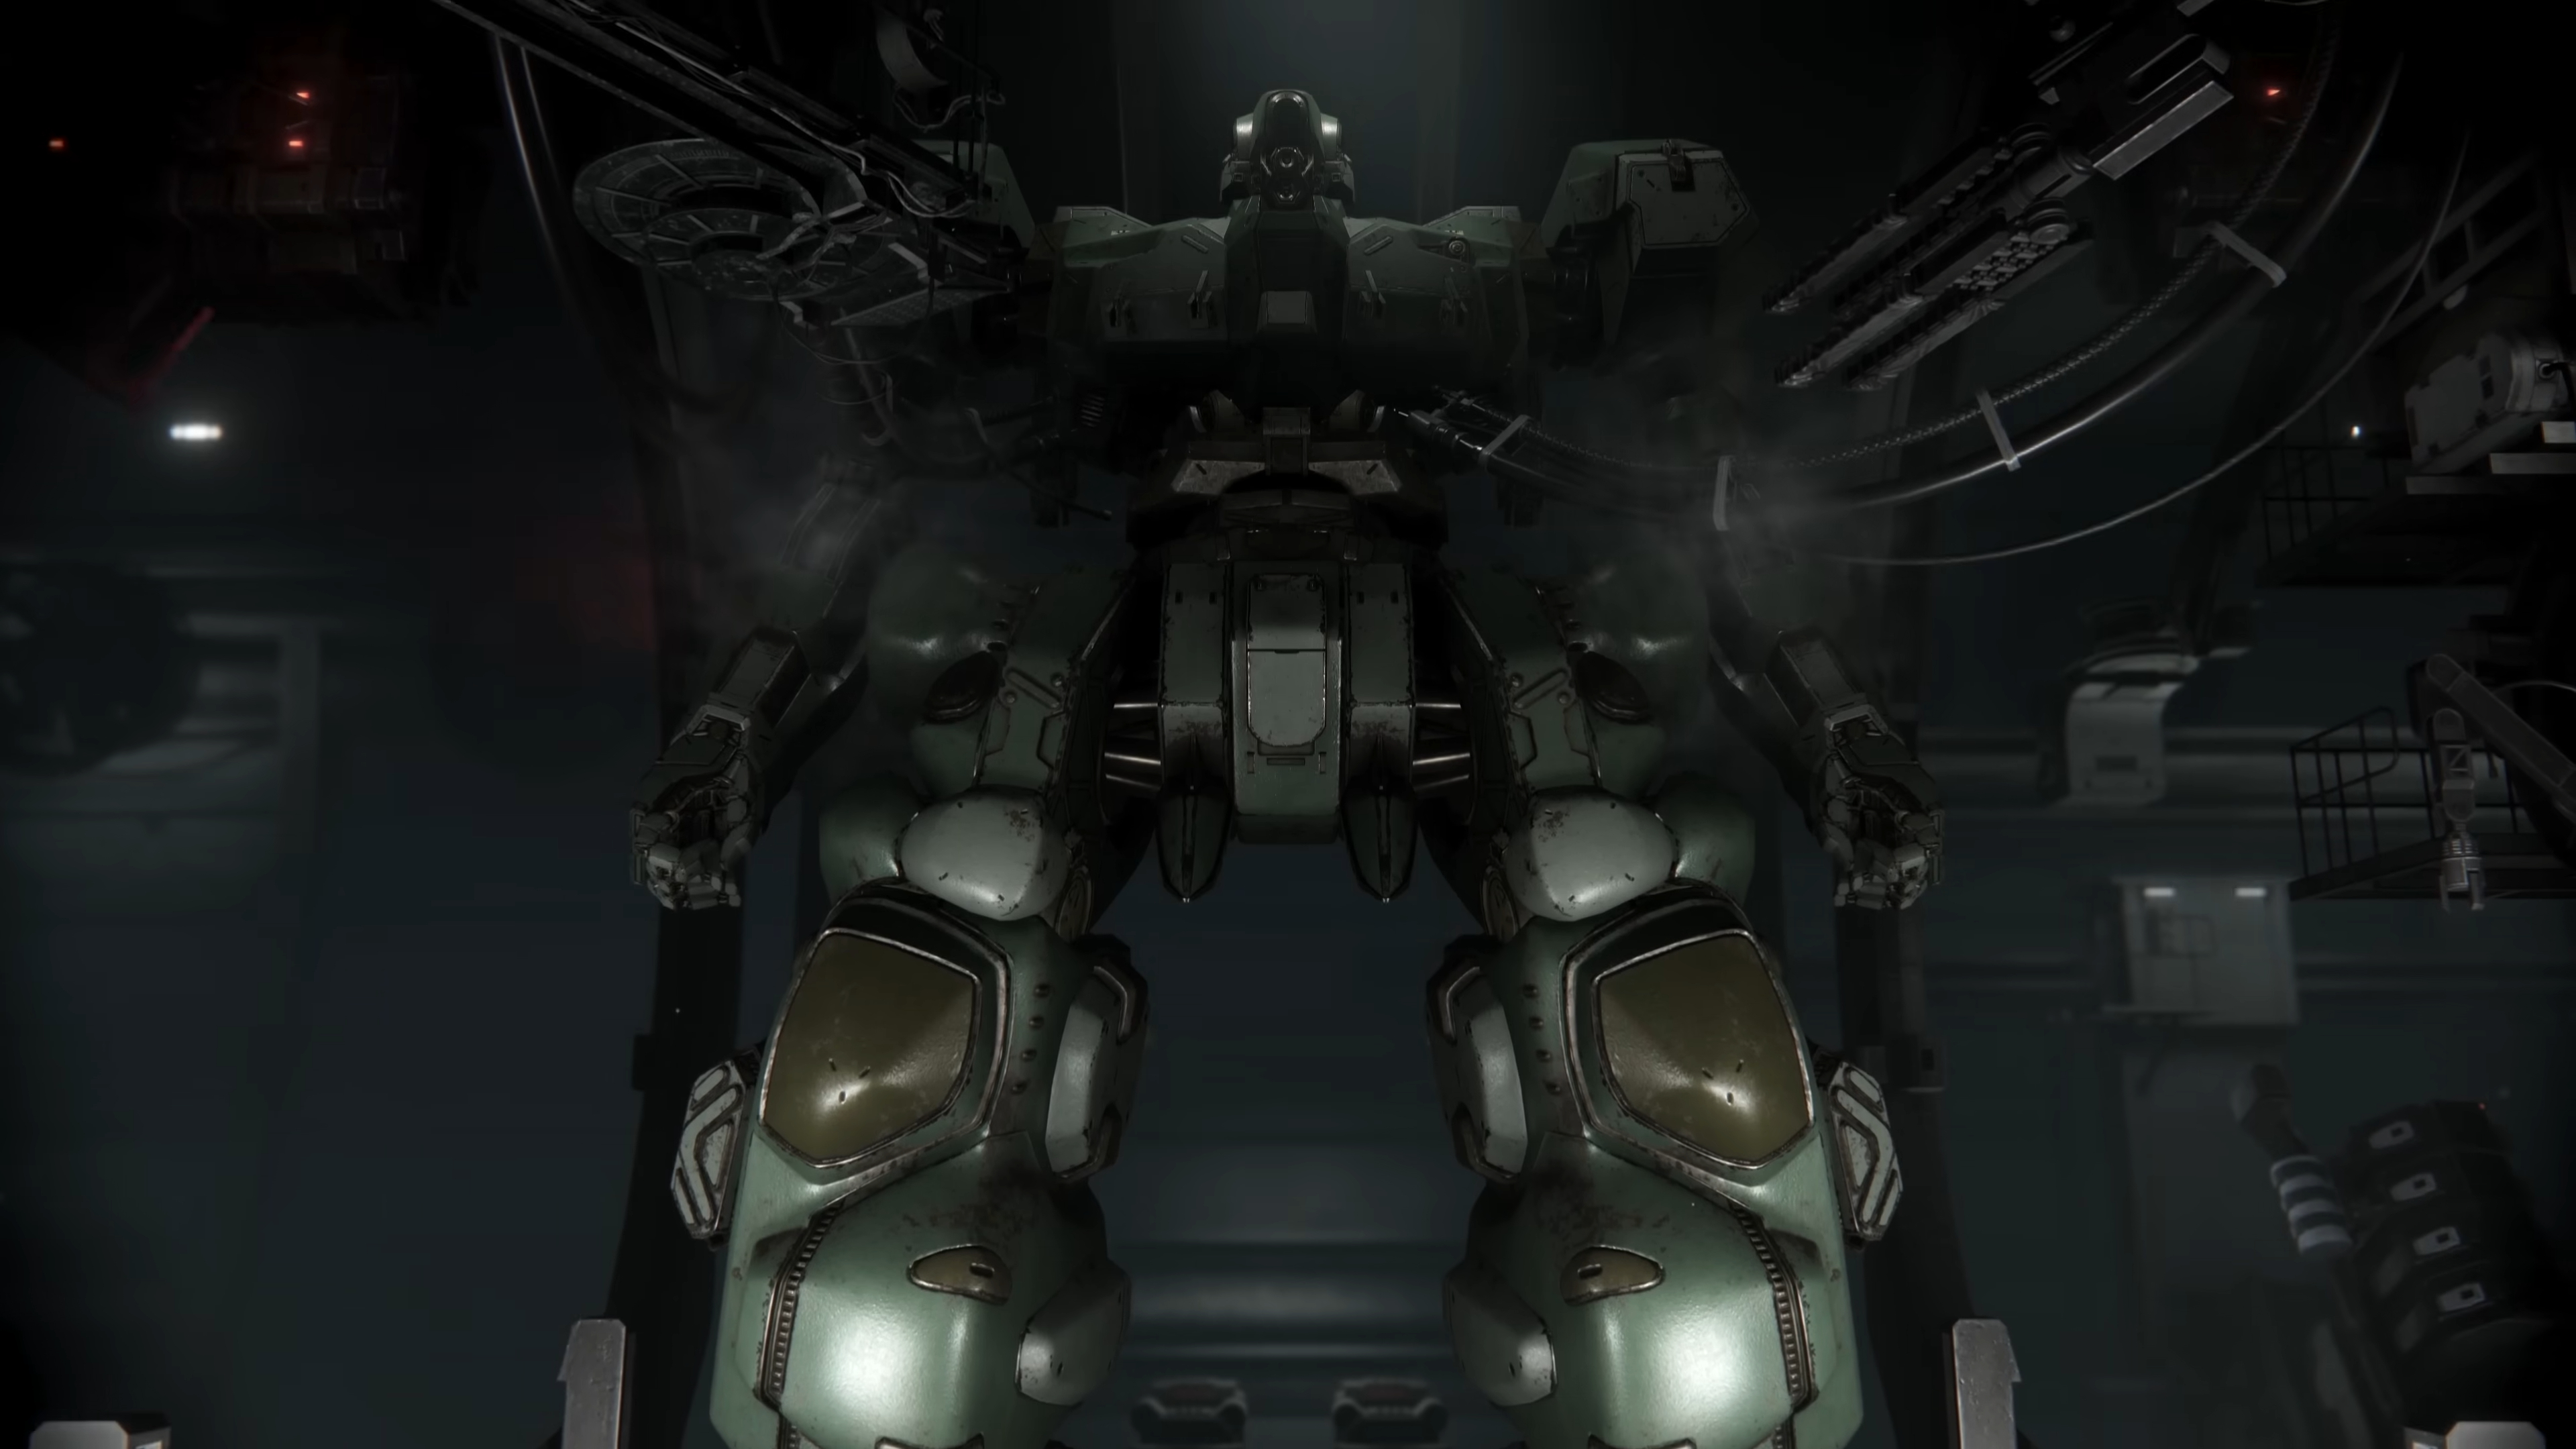 Best Early Game Weapons in Armored Core 6